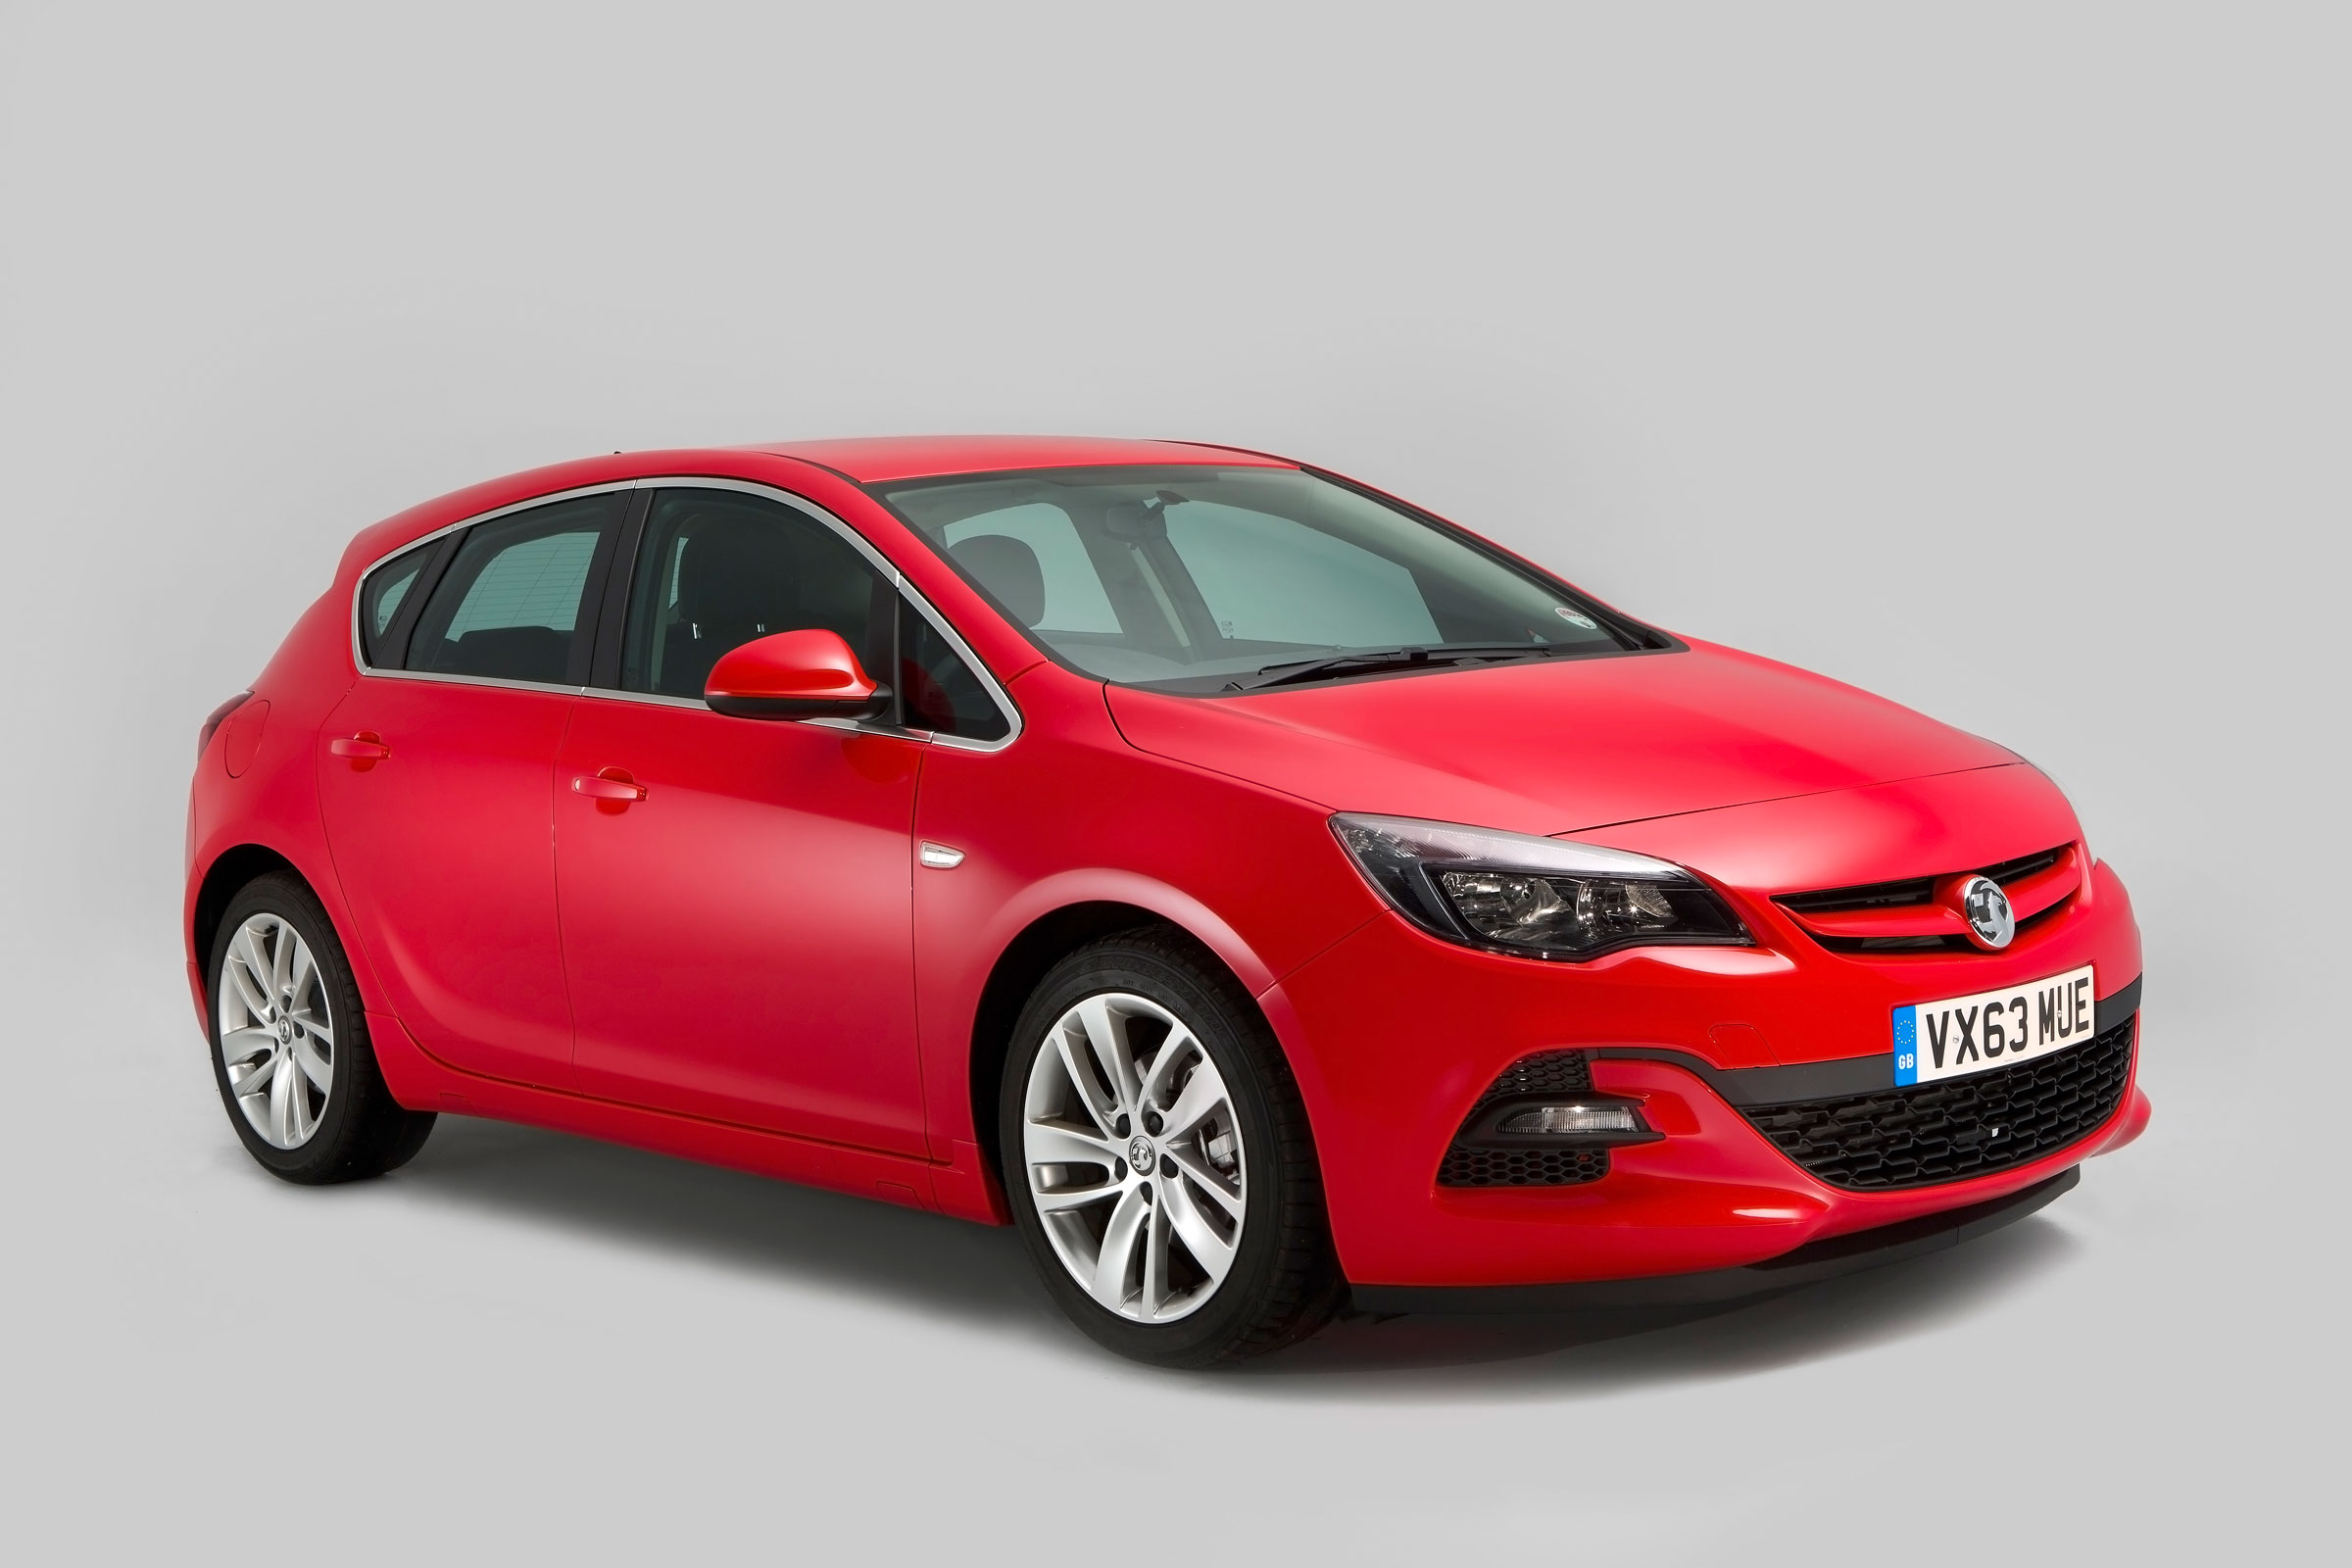 Used Vauxhall Astra buying guide: 2004-09 (Mk5) & 2009-15 (Mk6)